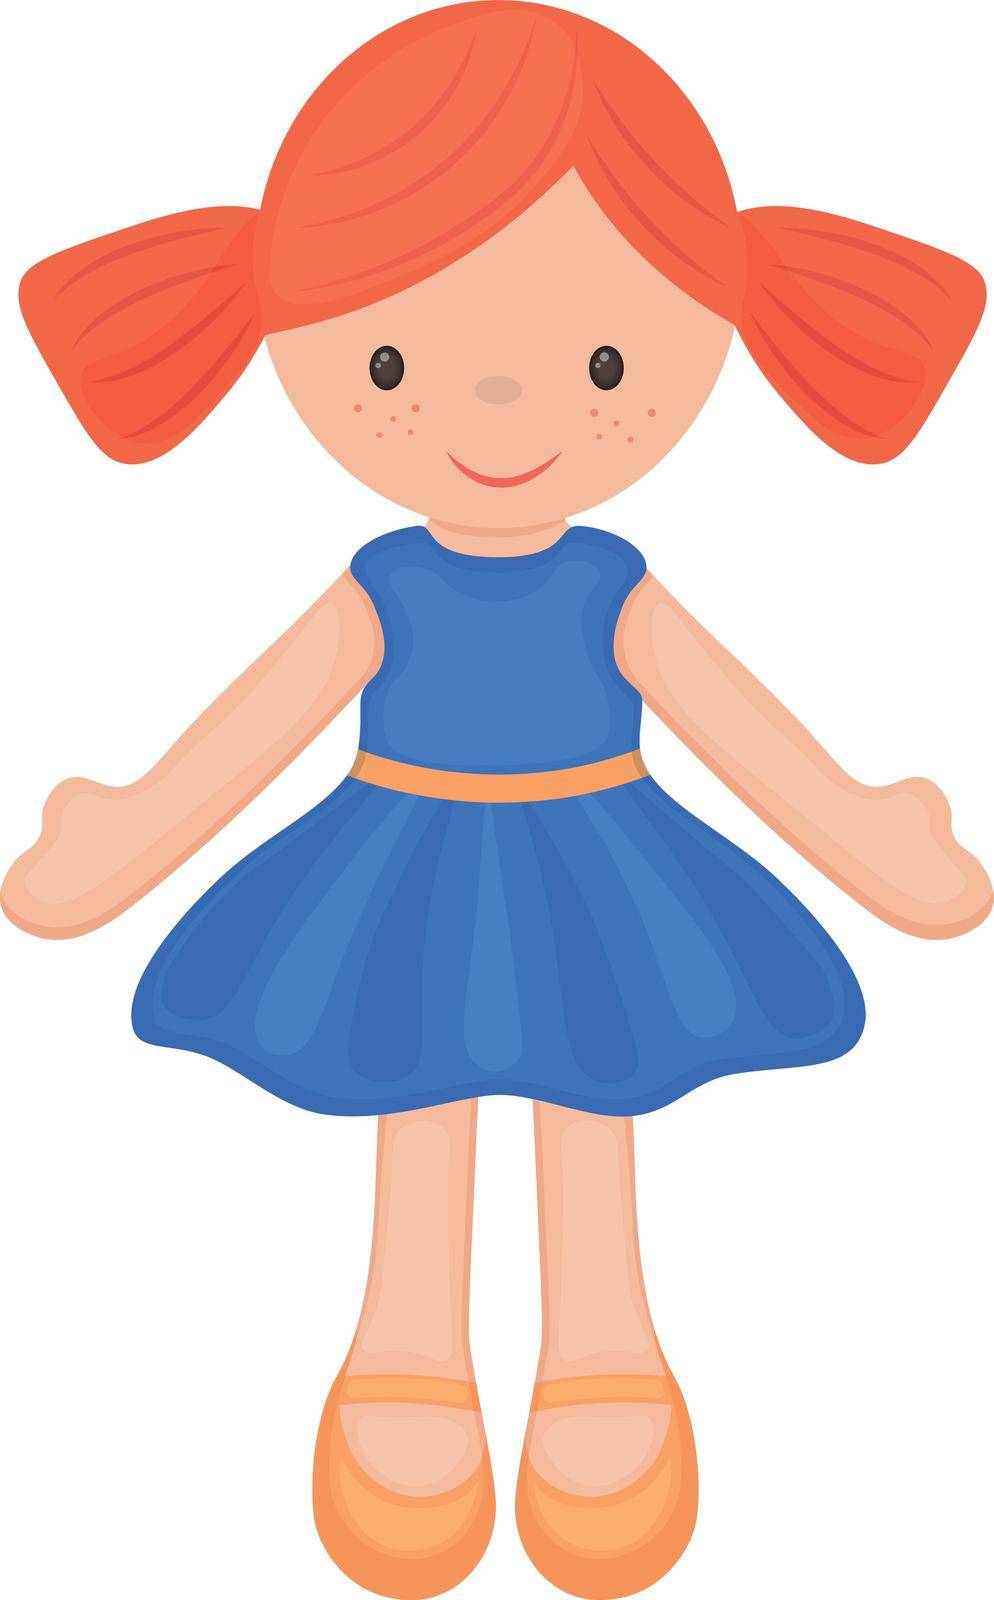 Doll. Cute children s toy with red hair. A doll in a beautiful dress. Vector illustration isolated on a white background by NastyaN